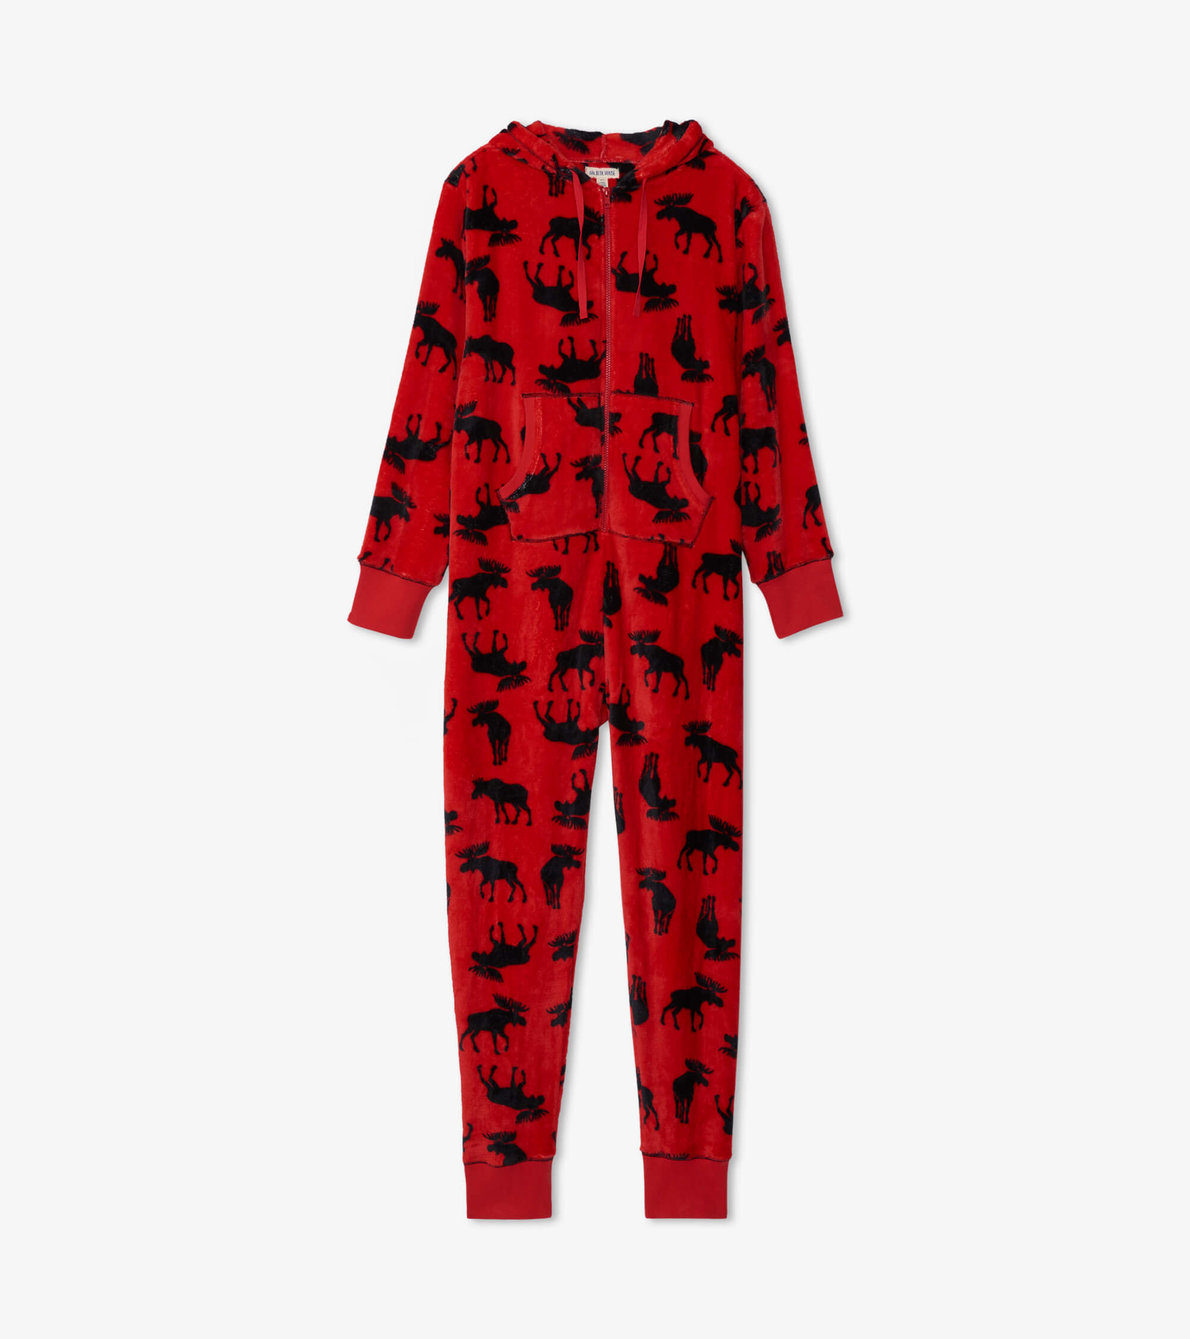 View larger image of Adult Moose on Red Hooded Fleece Jumpsuit